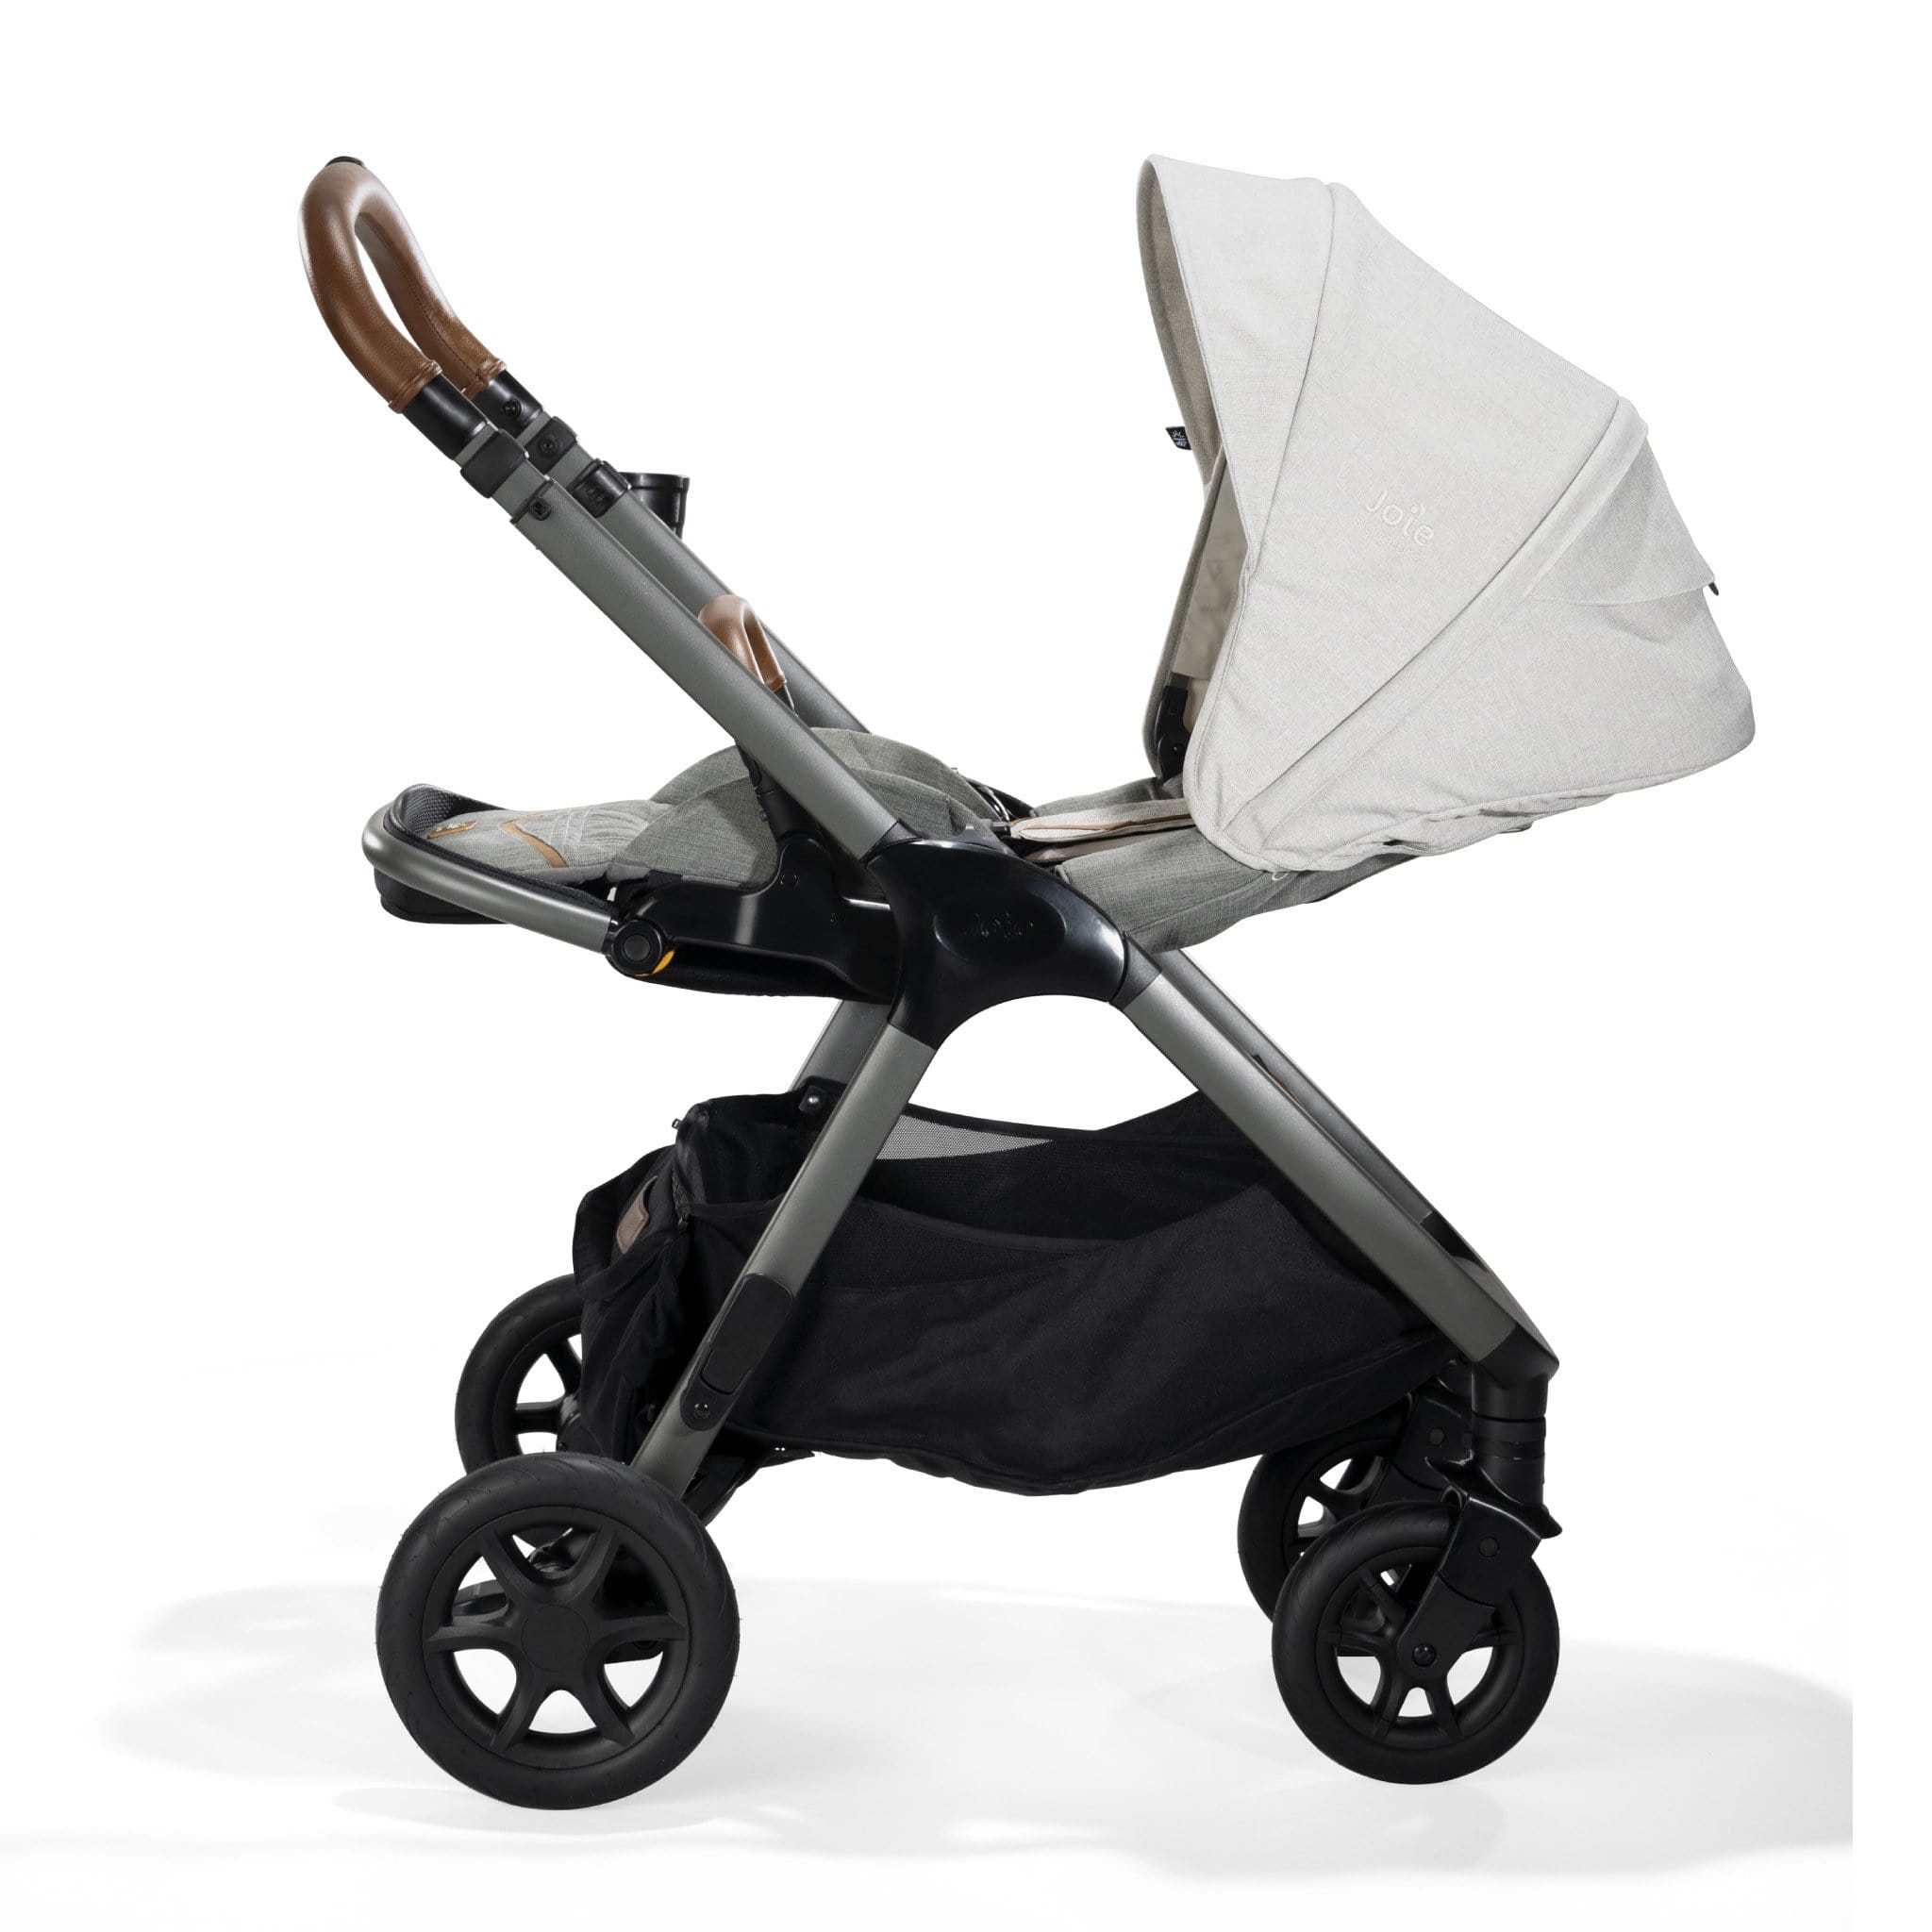 Joie Finiti 4in1 Signature Edition Pushchair & Carrycot Oyster Baby Prams 9301-OYS 5056080611181